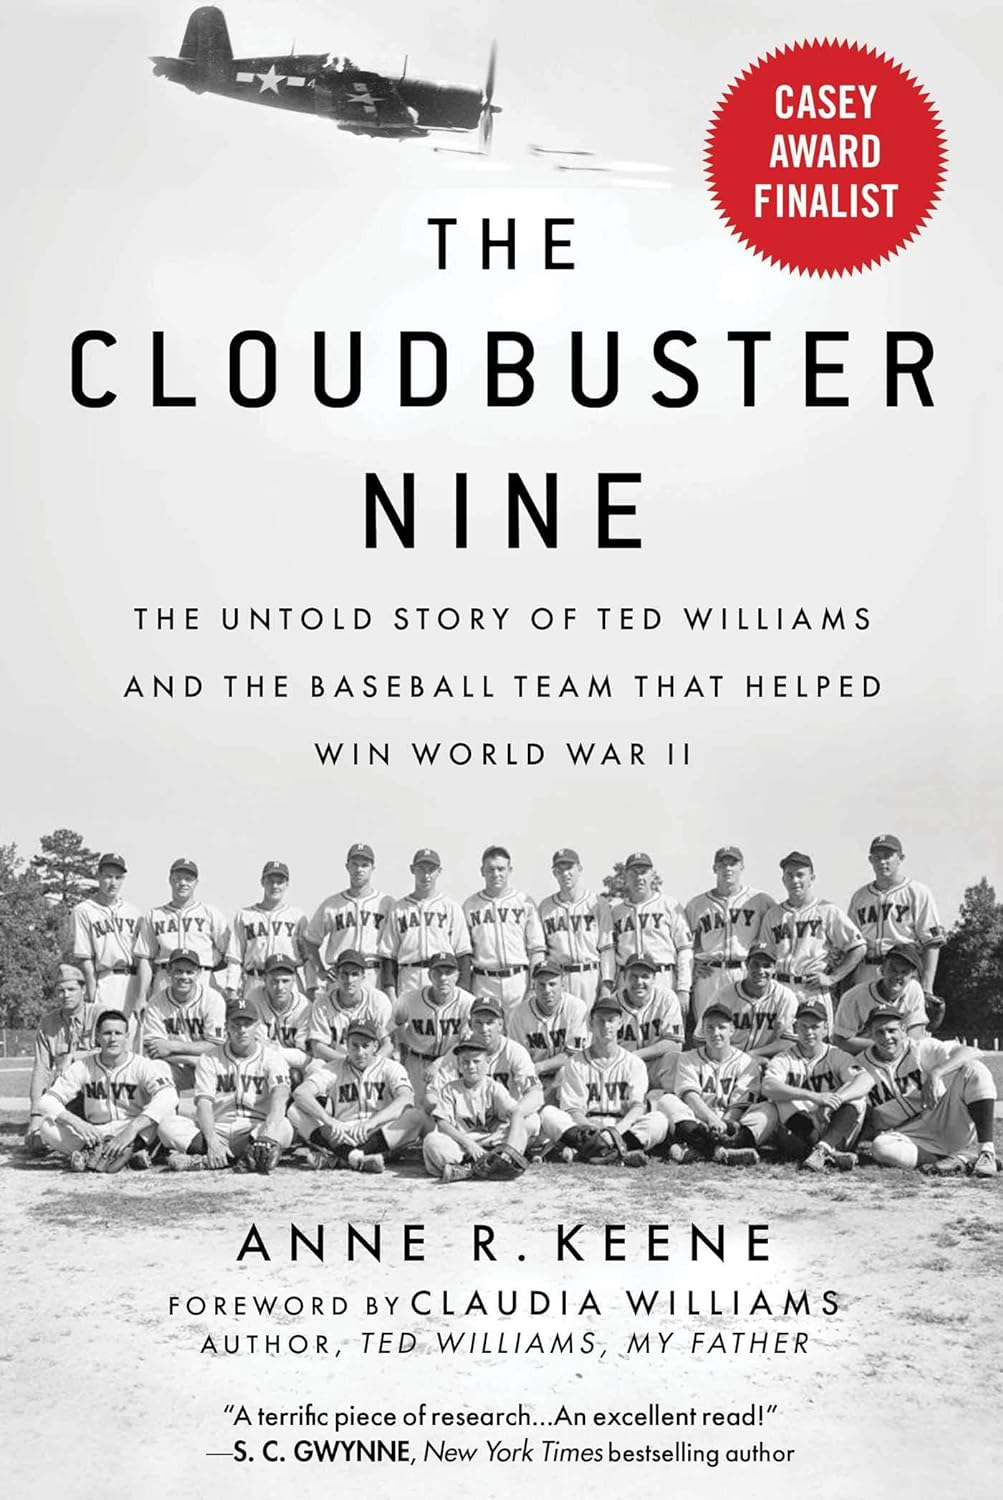 Cloudbuster Nine: The Untold Story of Ted Williams and the Baseball Team That Helped Win World War II     Paperback – April 21, 2020